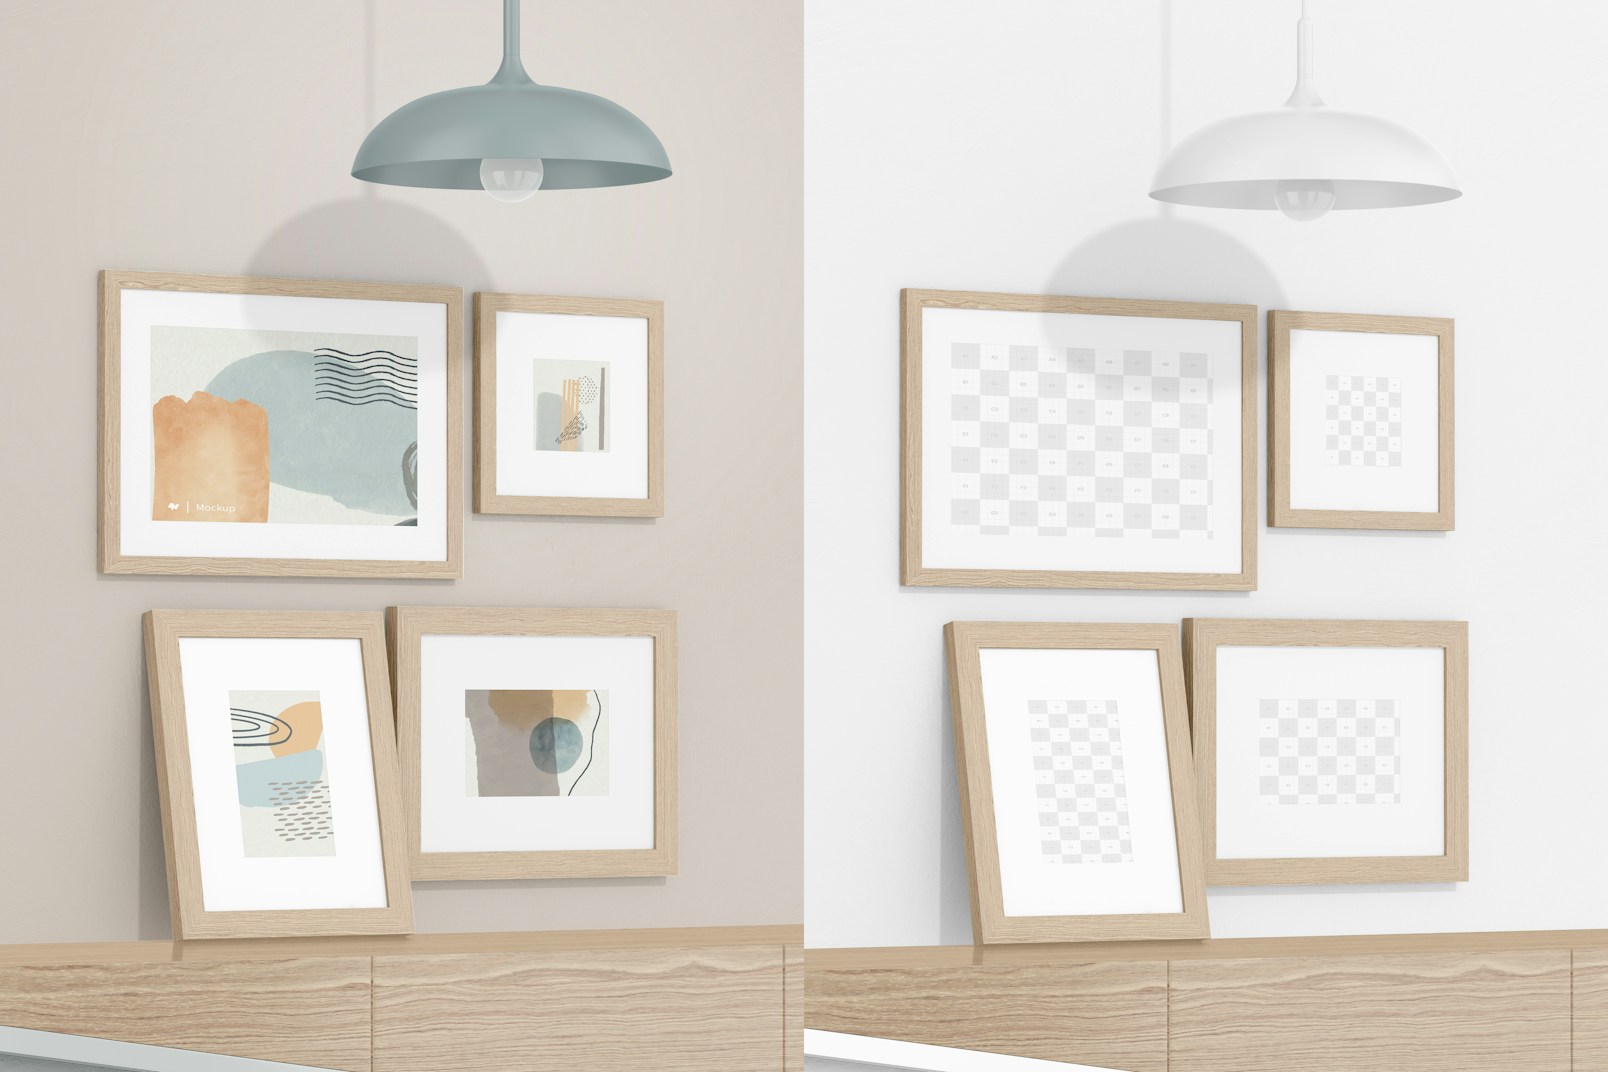 4 Gallery Frames with Lamp Mockup, Perspective